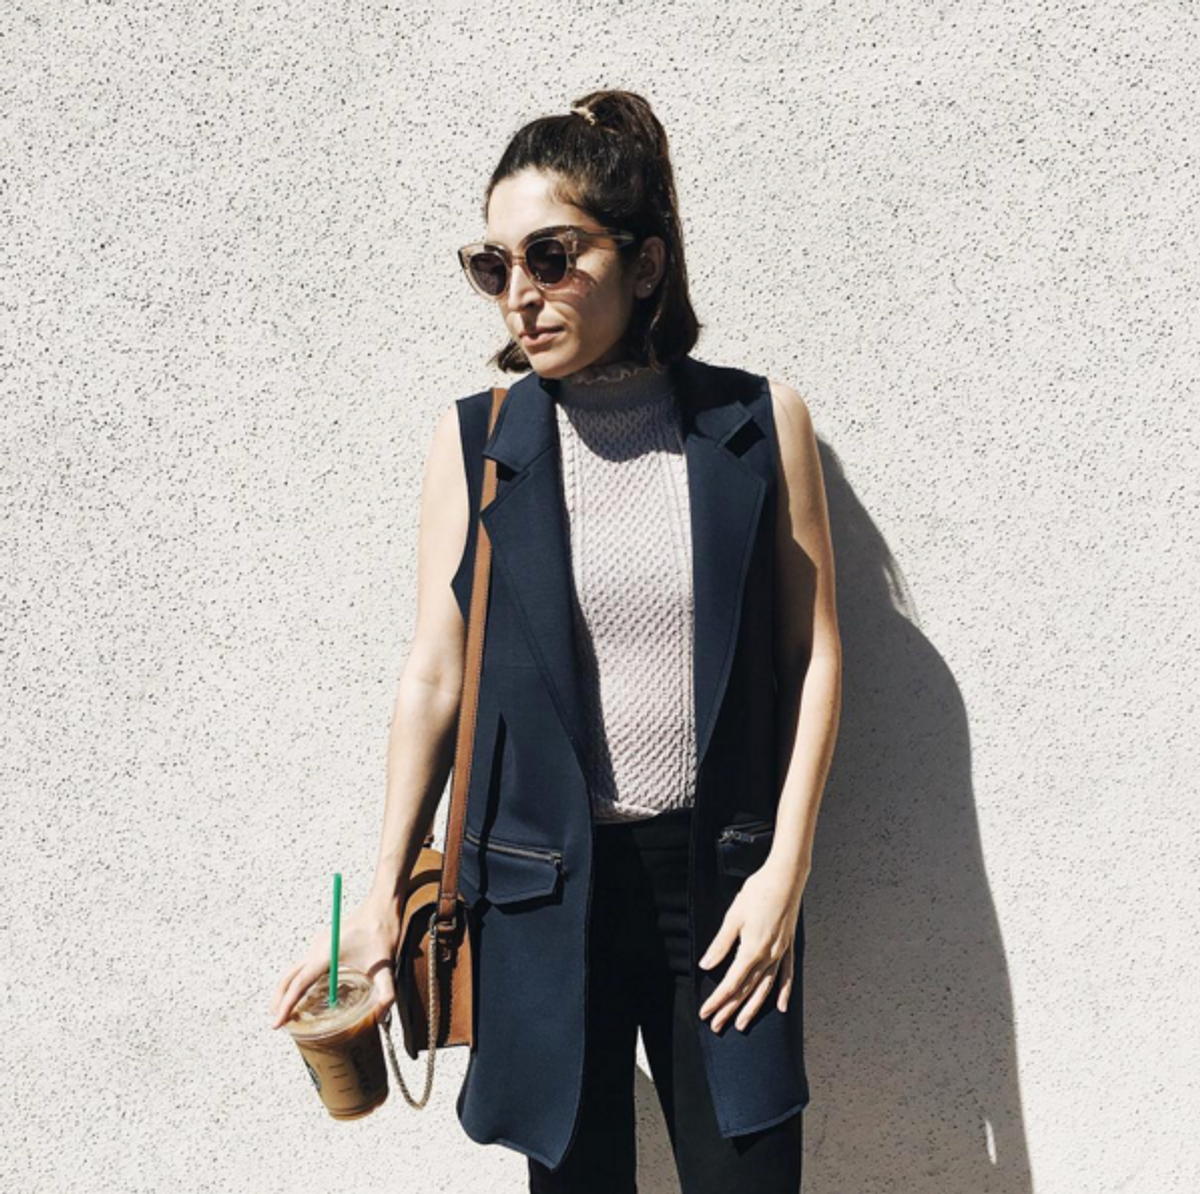 15 Instagram Accounts to Follow for Major Style Inspiration